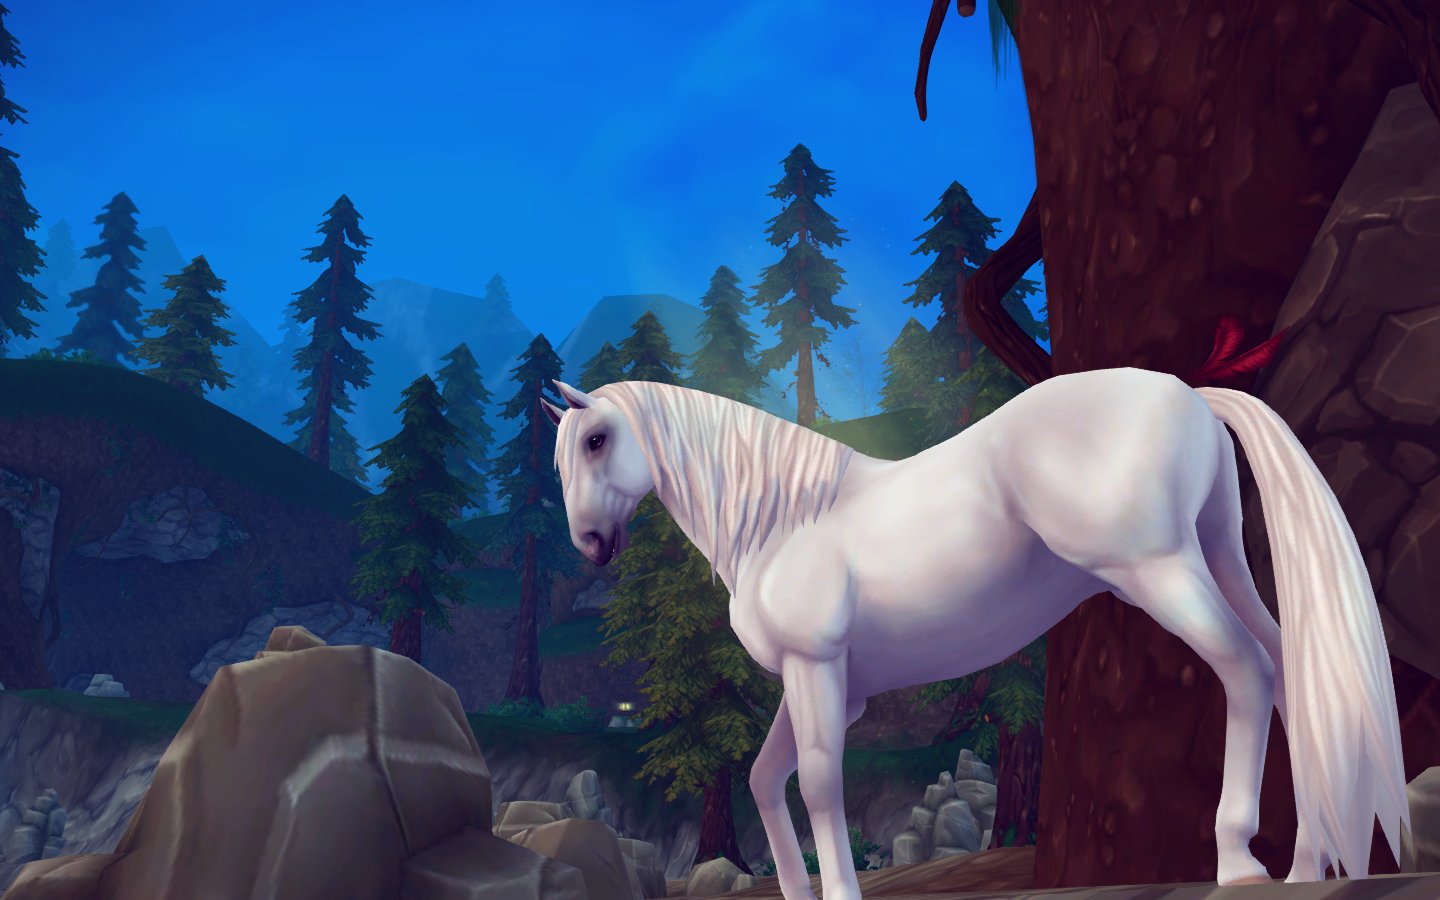 “@StarStable #PhotoMode Another round of shots with my new Ace &lt;...